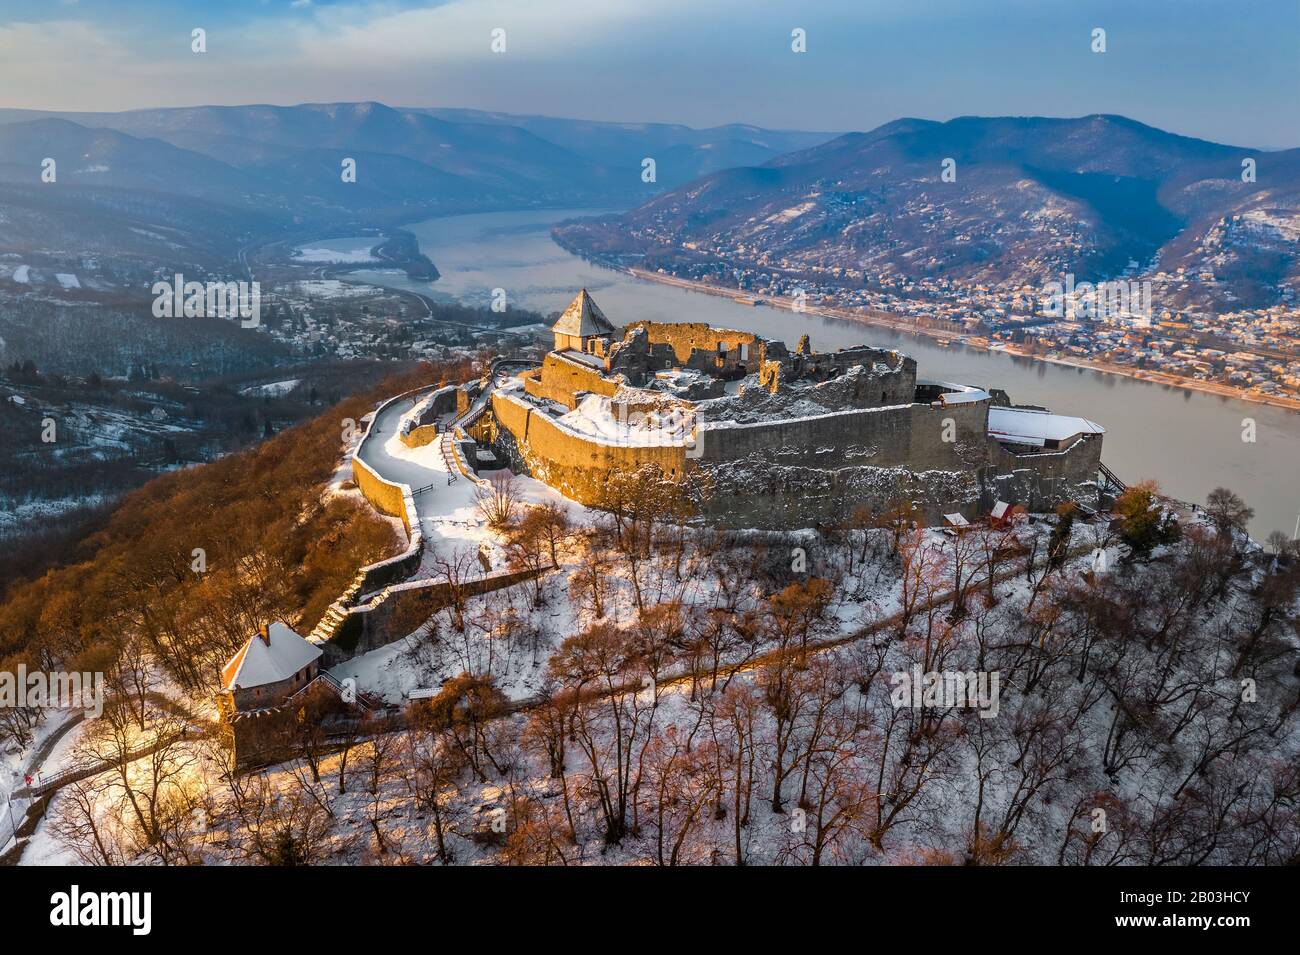 Visegrad, Hungary - Aerial view of the beautiful snowy high castle of Visegrad at sunrise on a winter morning with Dunakanyar at background Stock Photo